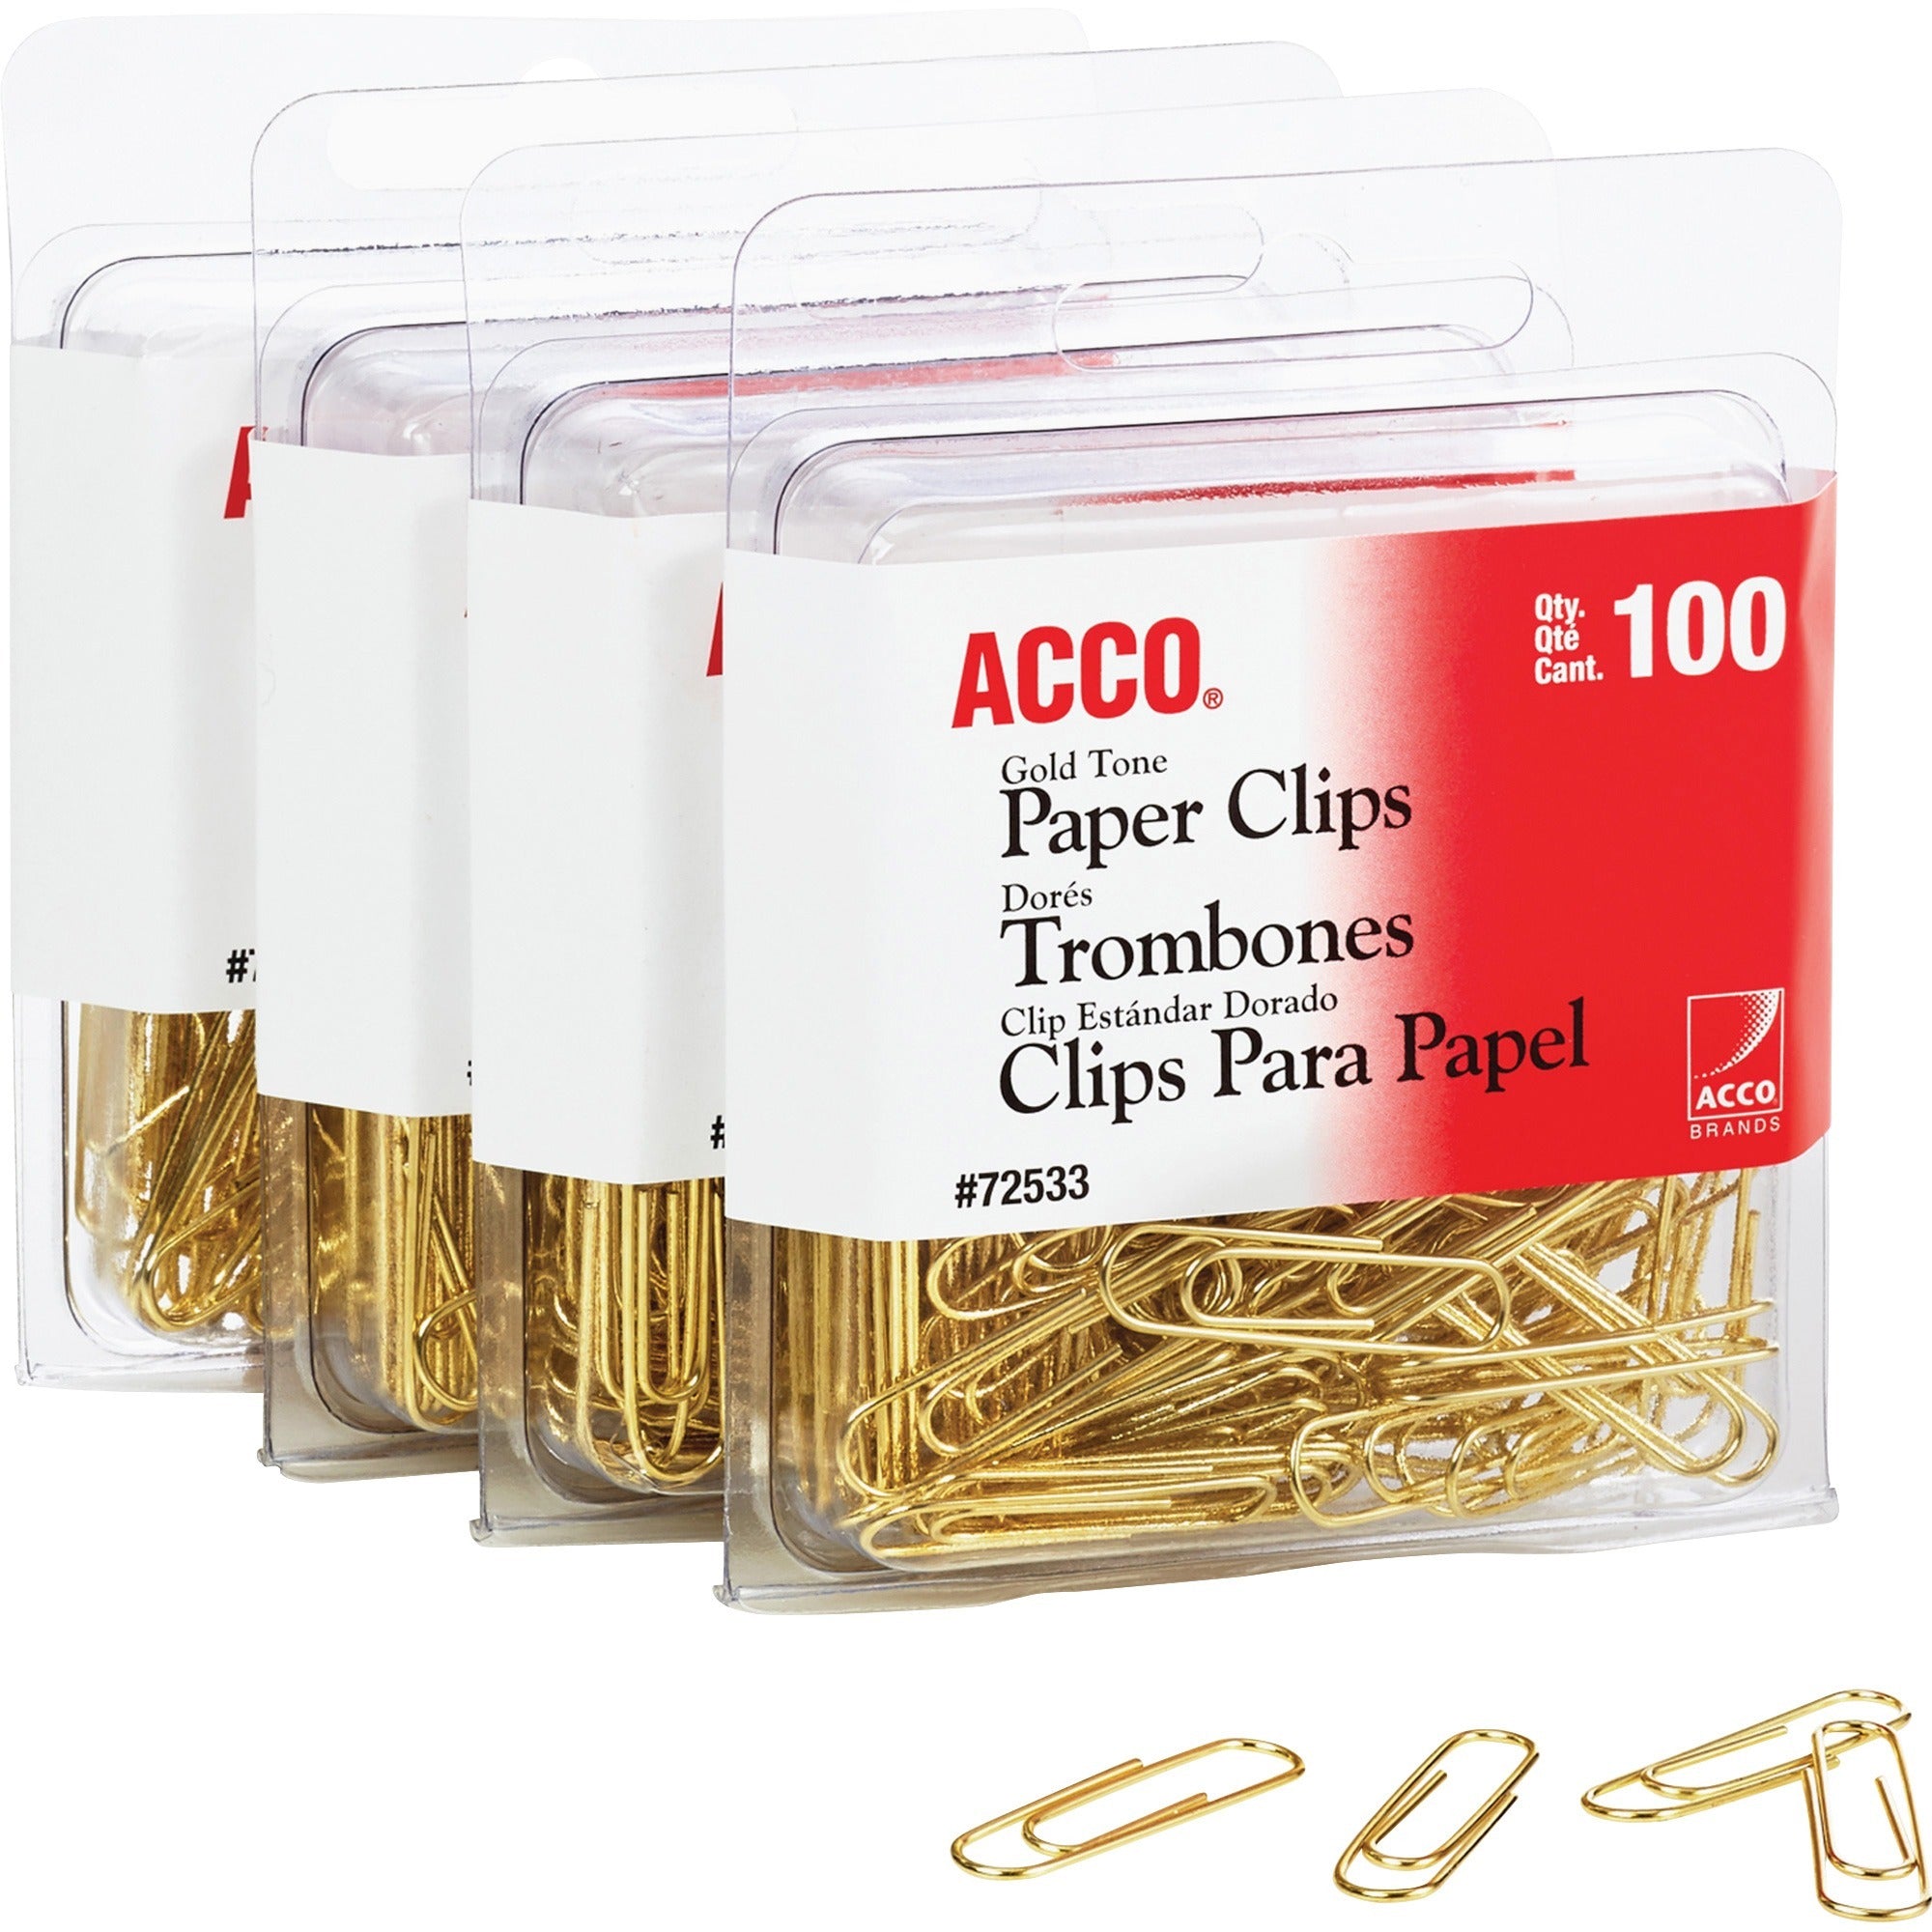 acco-gold-tone-paper-clips-no-2-14-length-x-05-width-10-sheet-capacity-for-office-home-school-document-paper-sturdy-flex-resistant-bend-resistant-400-pack-gold_acc72554 - 2